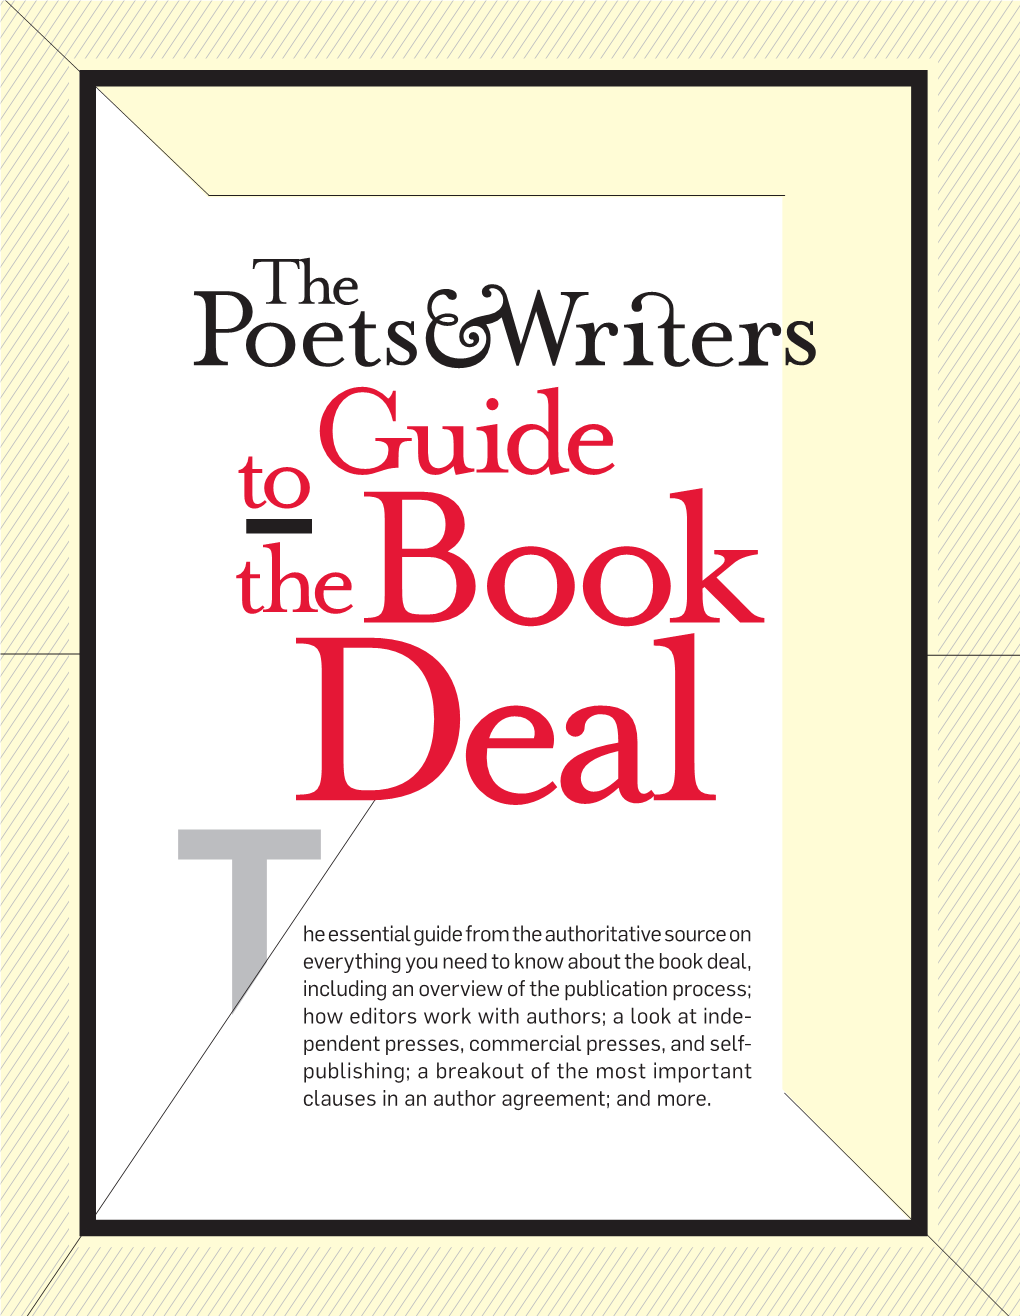 Guide to the Book Deal, Which Includes Ten Articles Packed with Insider Tips and Information to Help You T Navigate the Publication Process